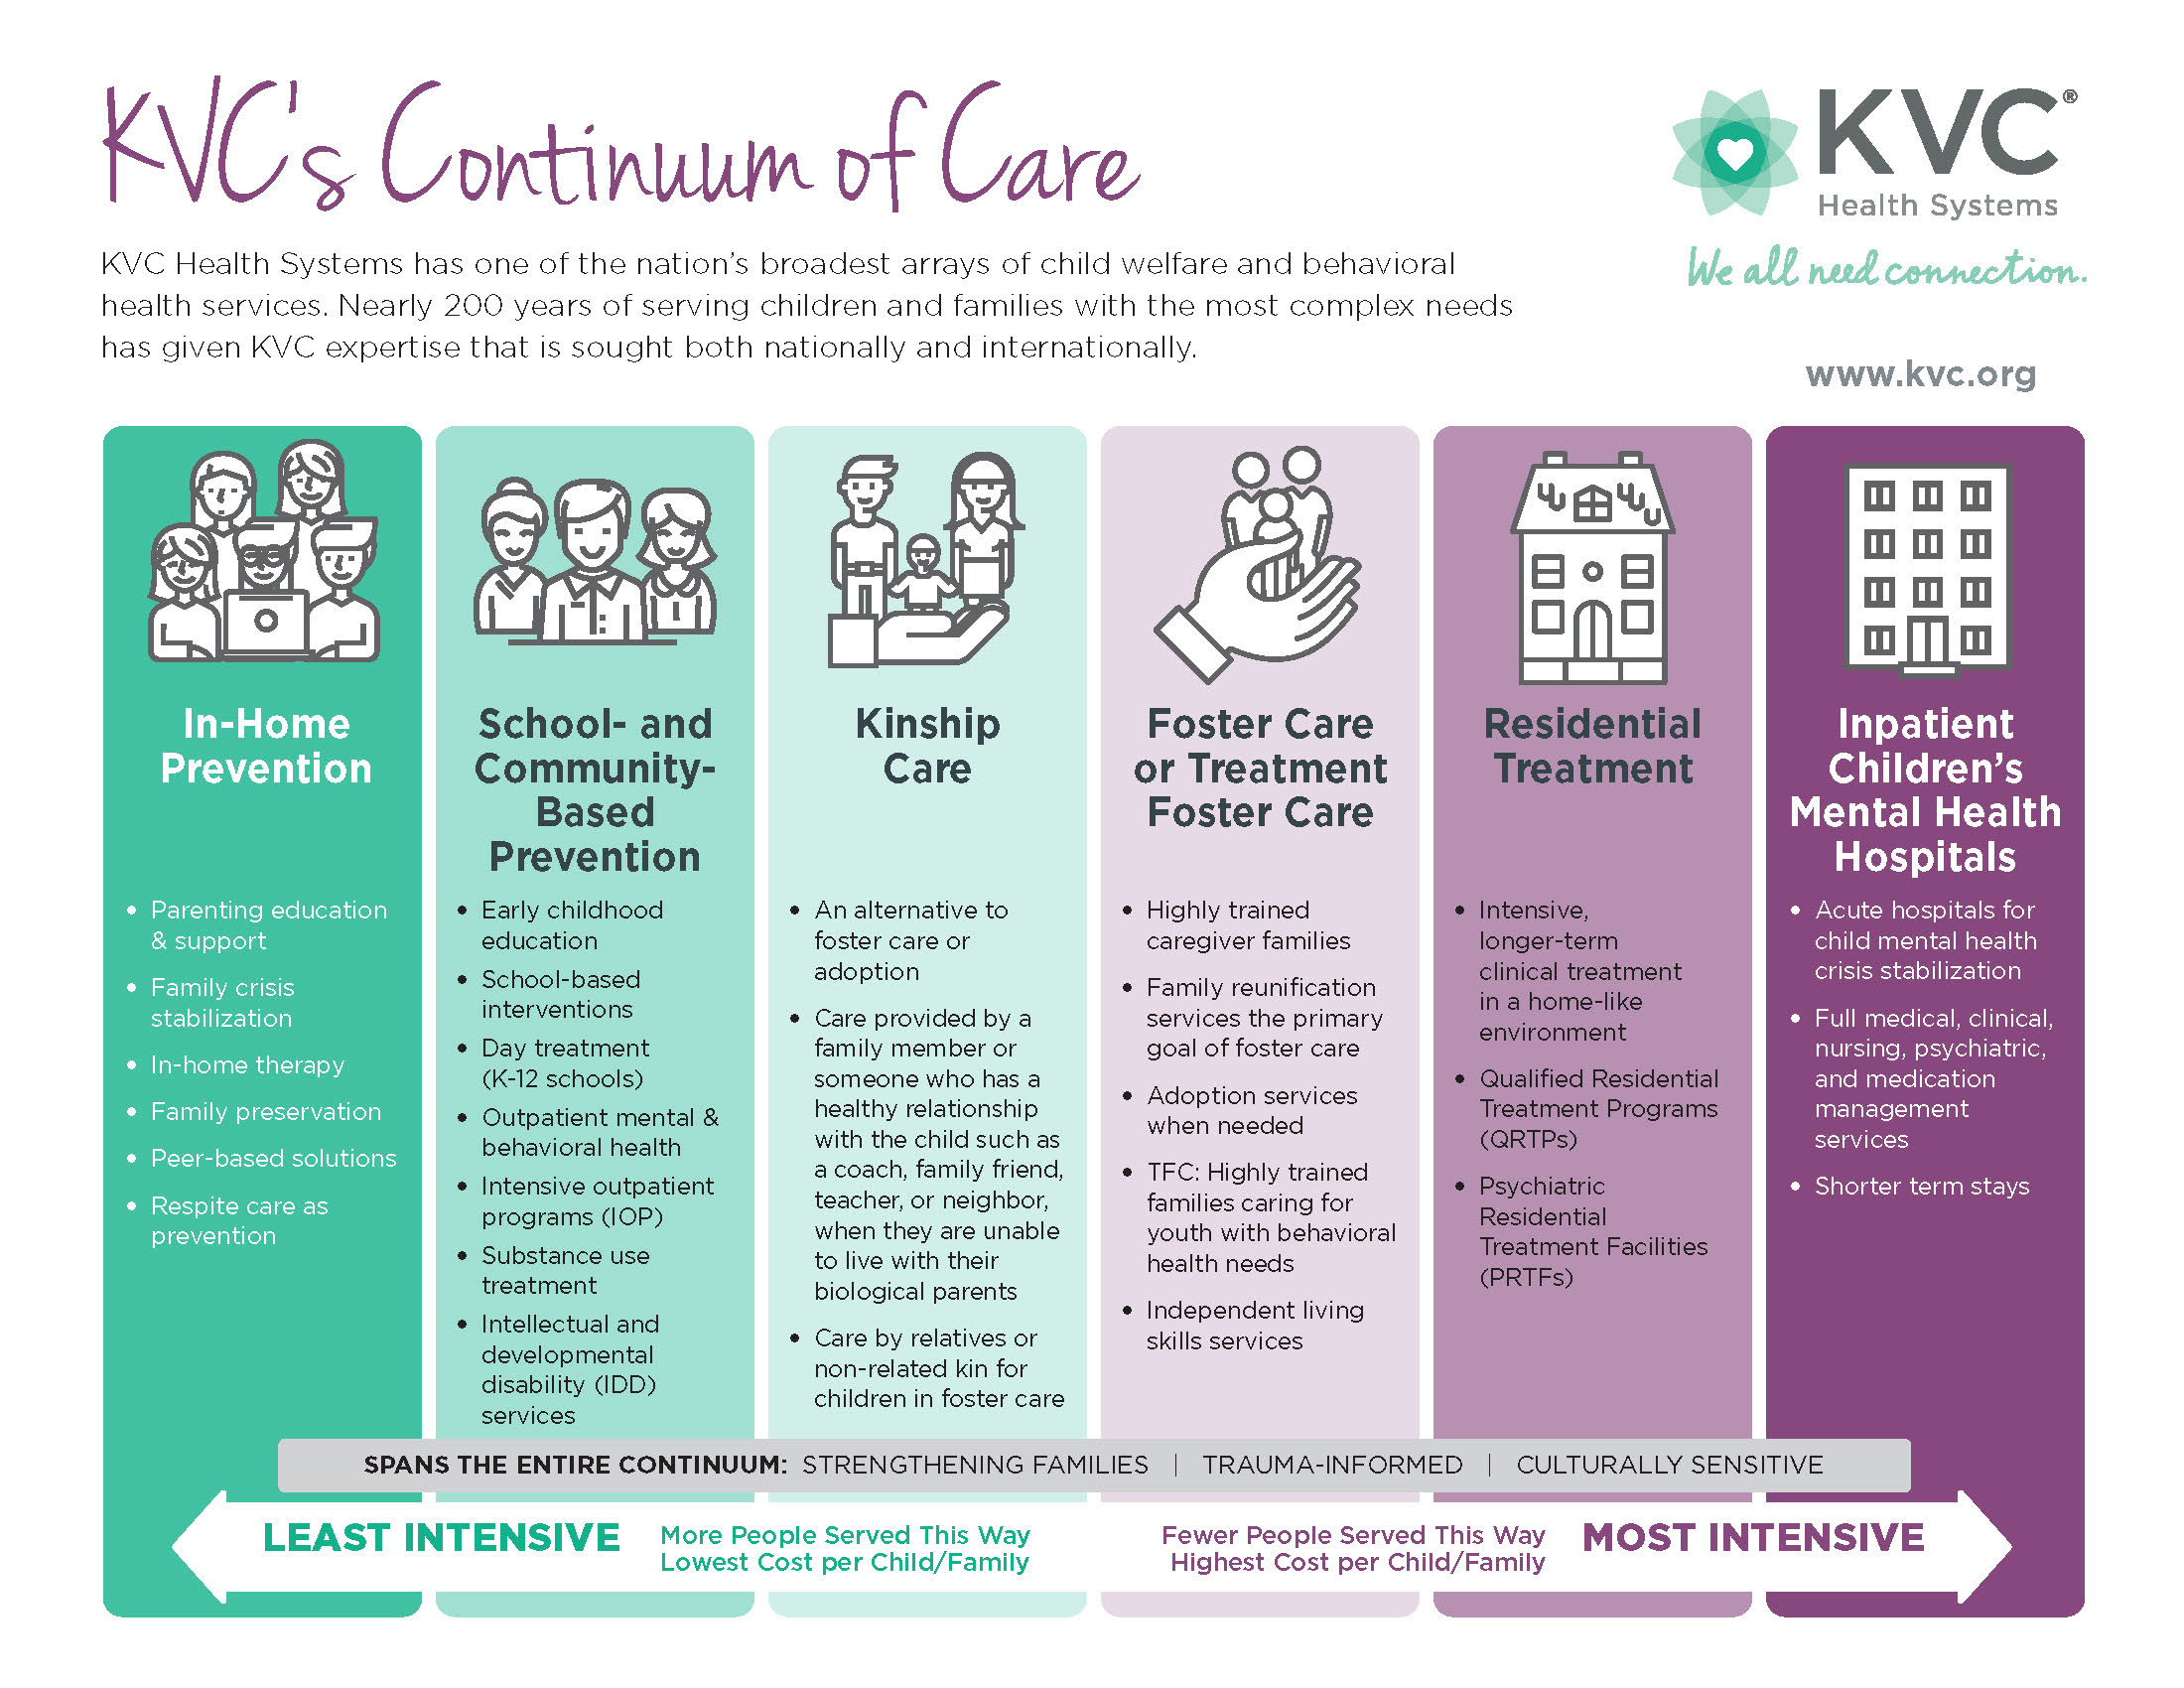 KVC Health Systems' continuum of care - from community-based family services to inpatient children's mental health hospitals